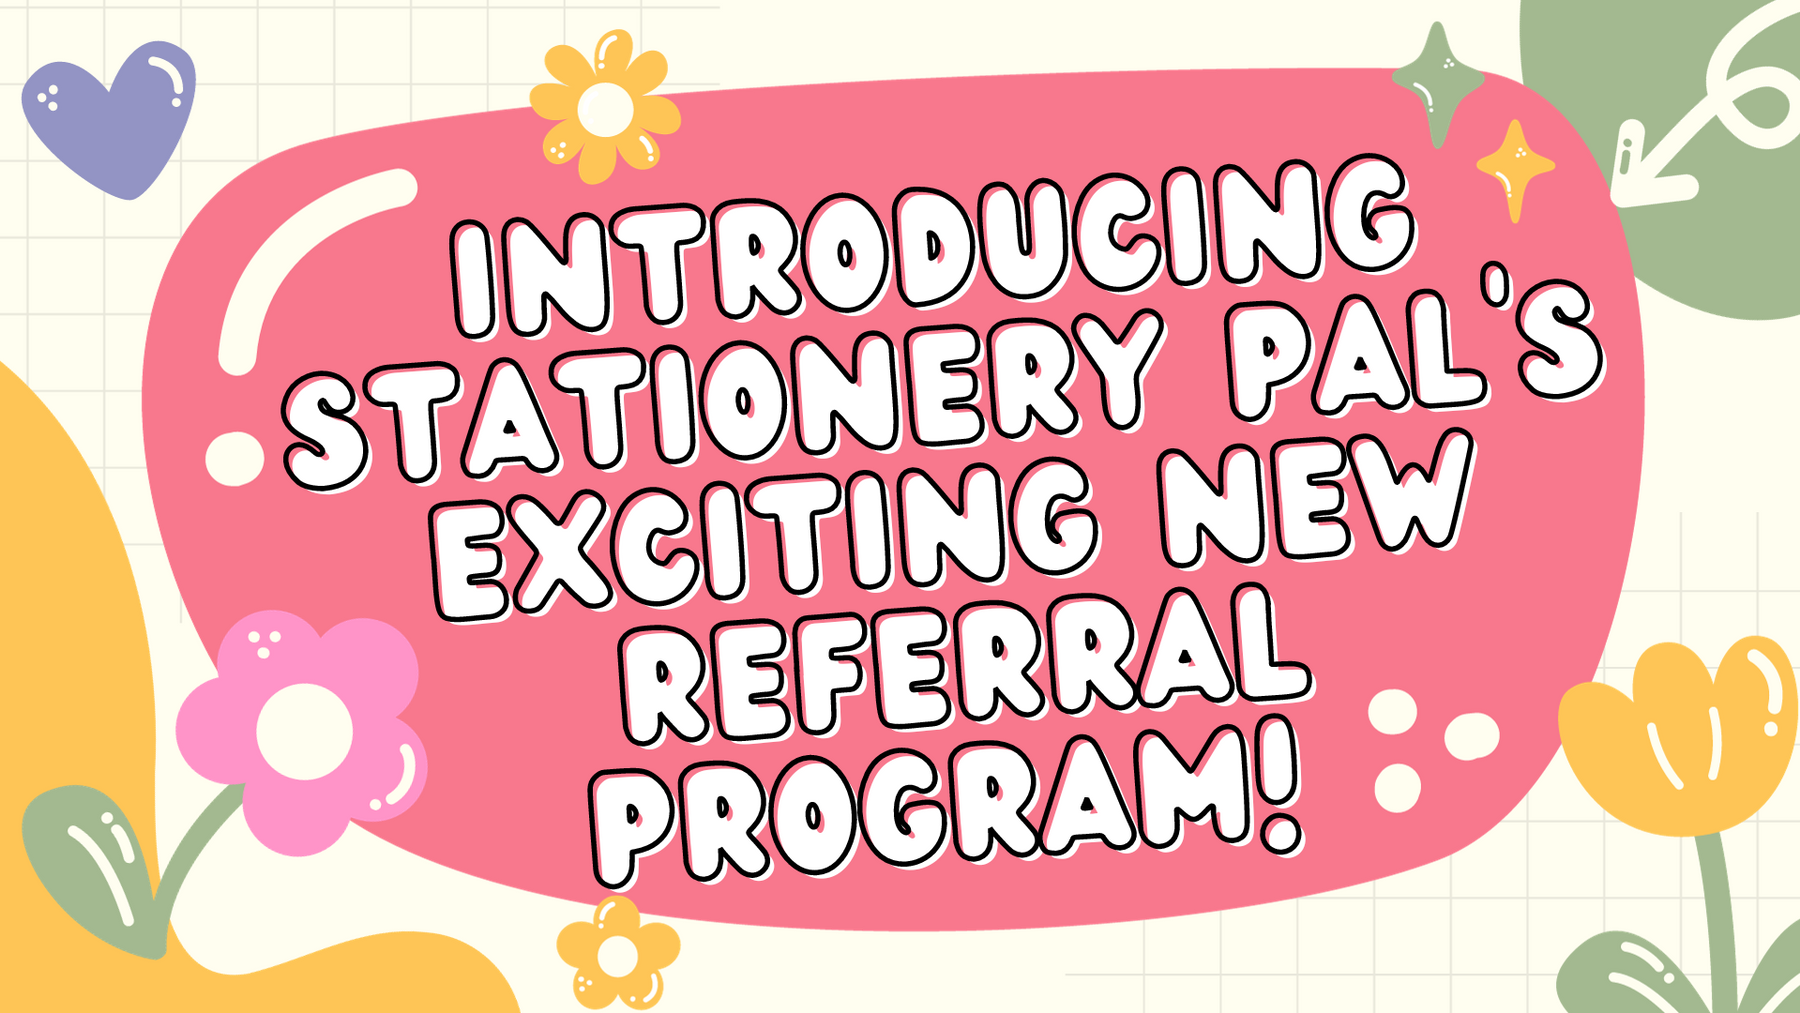 Introducing Stationery Pal's Exciting New Referral Program! 🚀